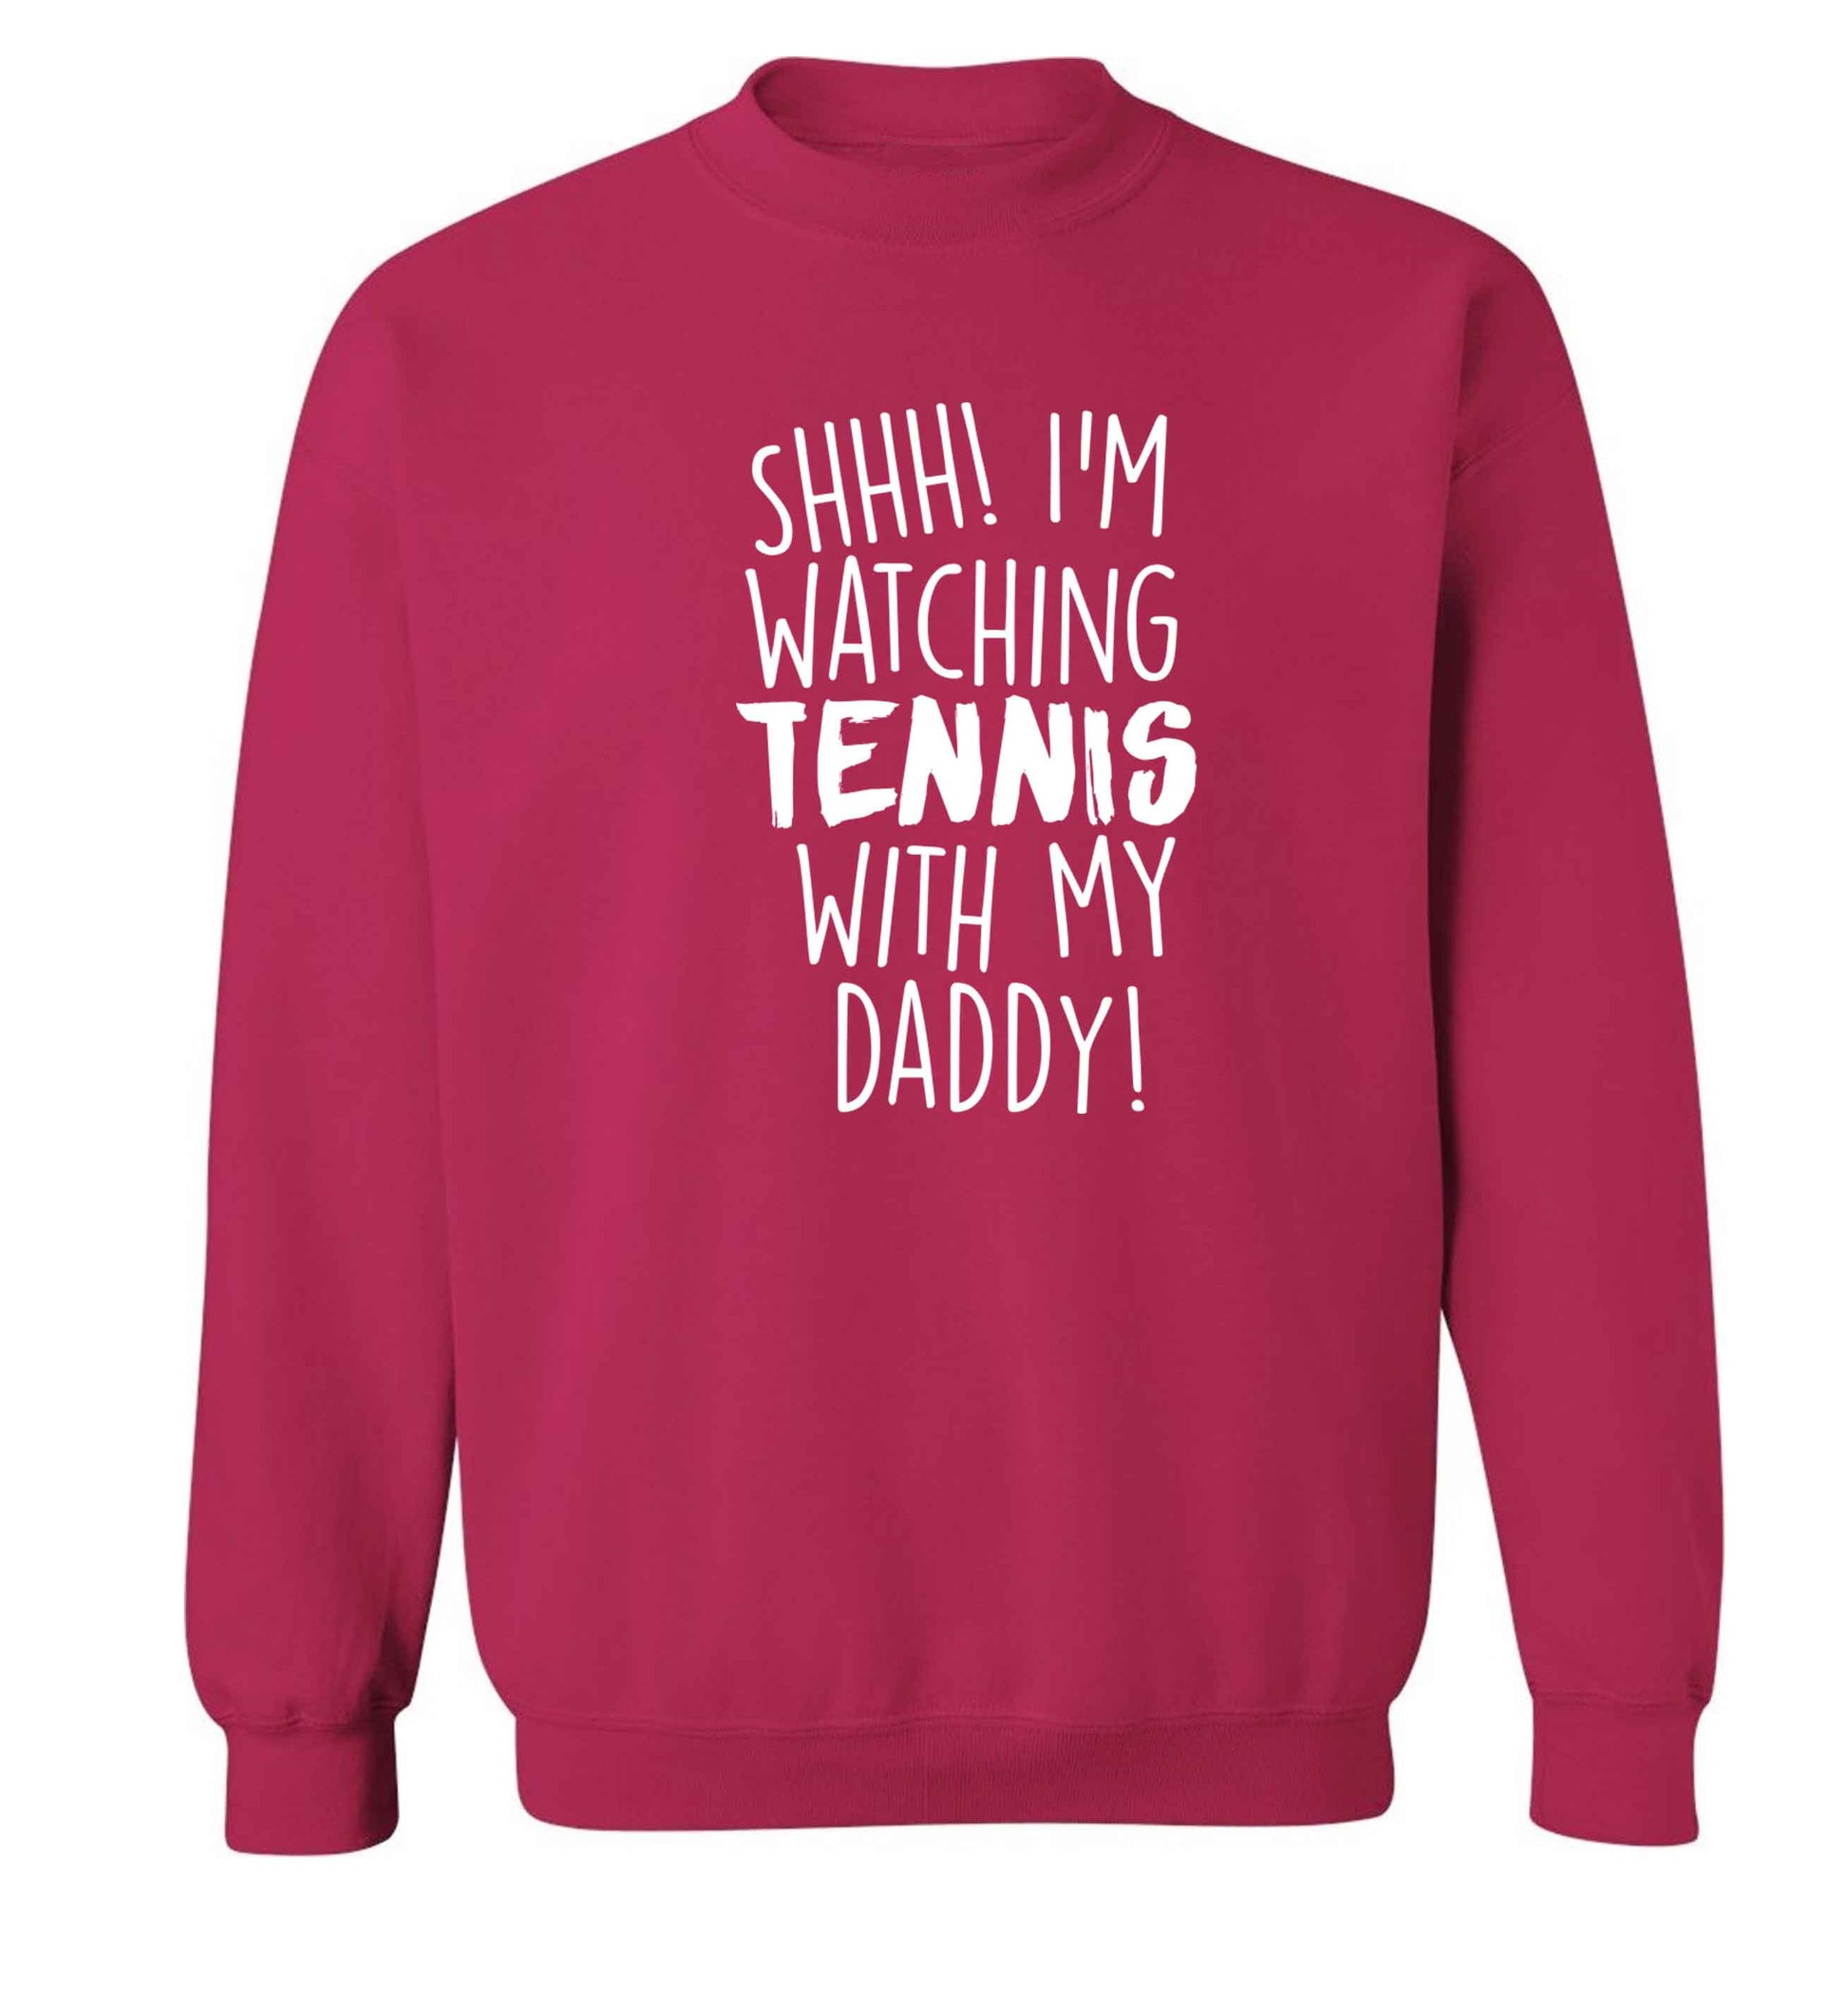 Shh! I'm watching tennis with my daddy! Adult's unisex pink Sweater 2XL